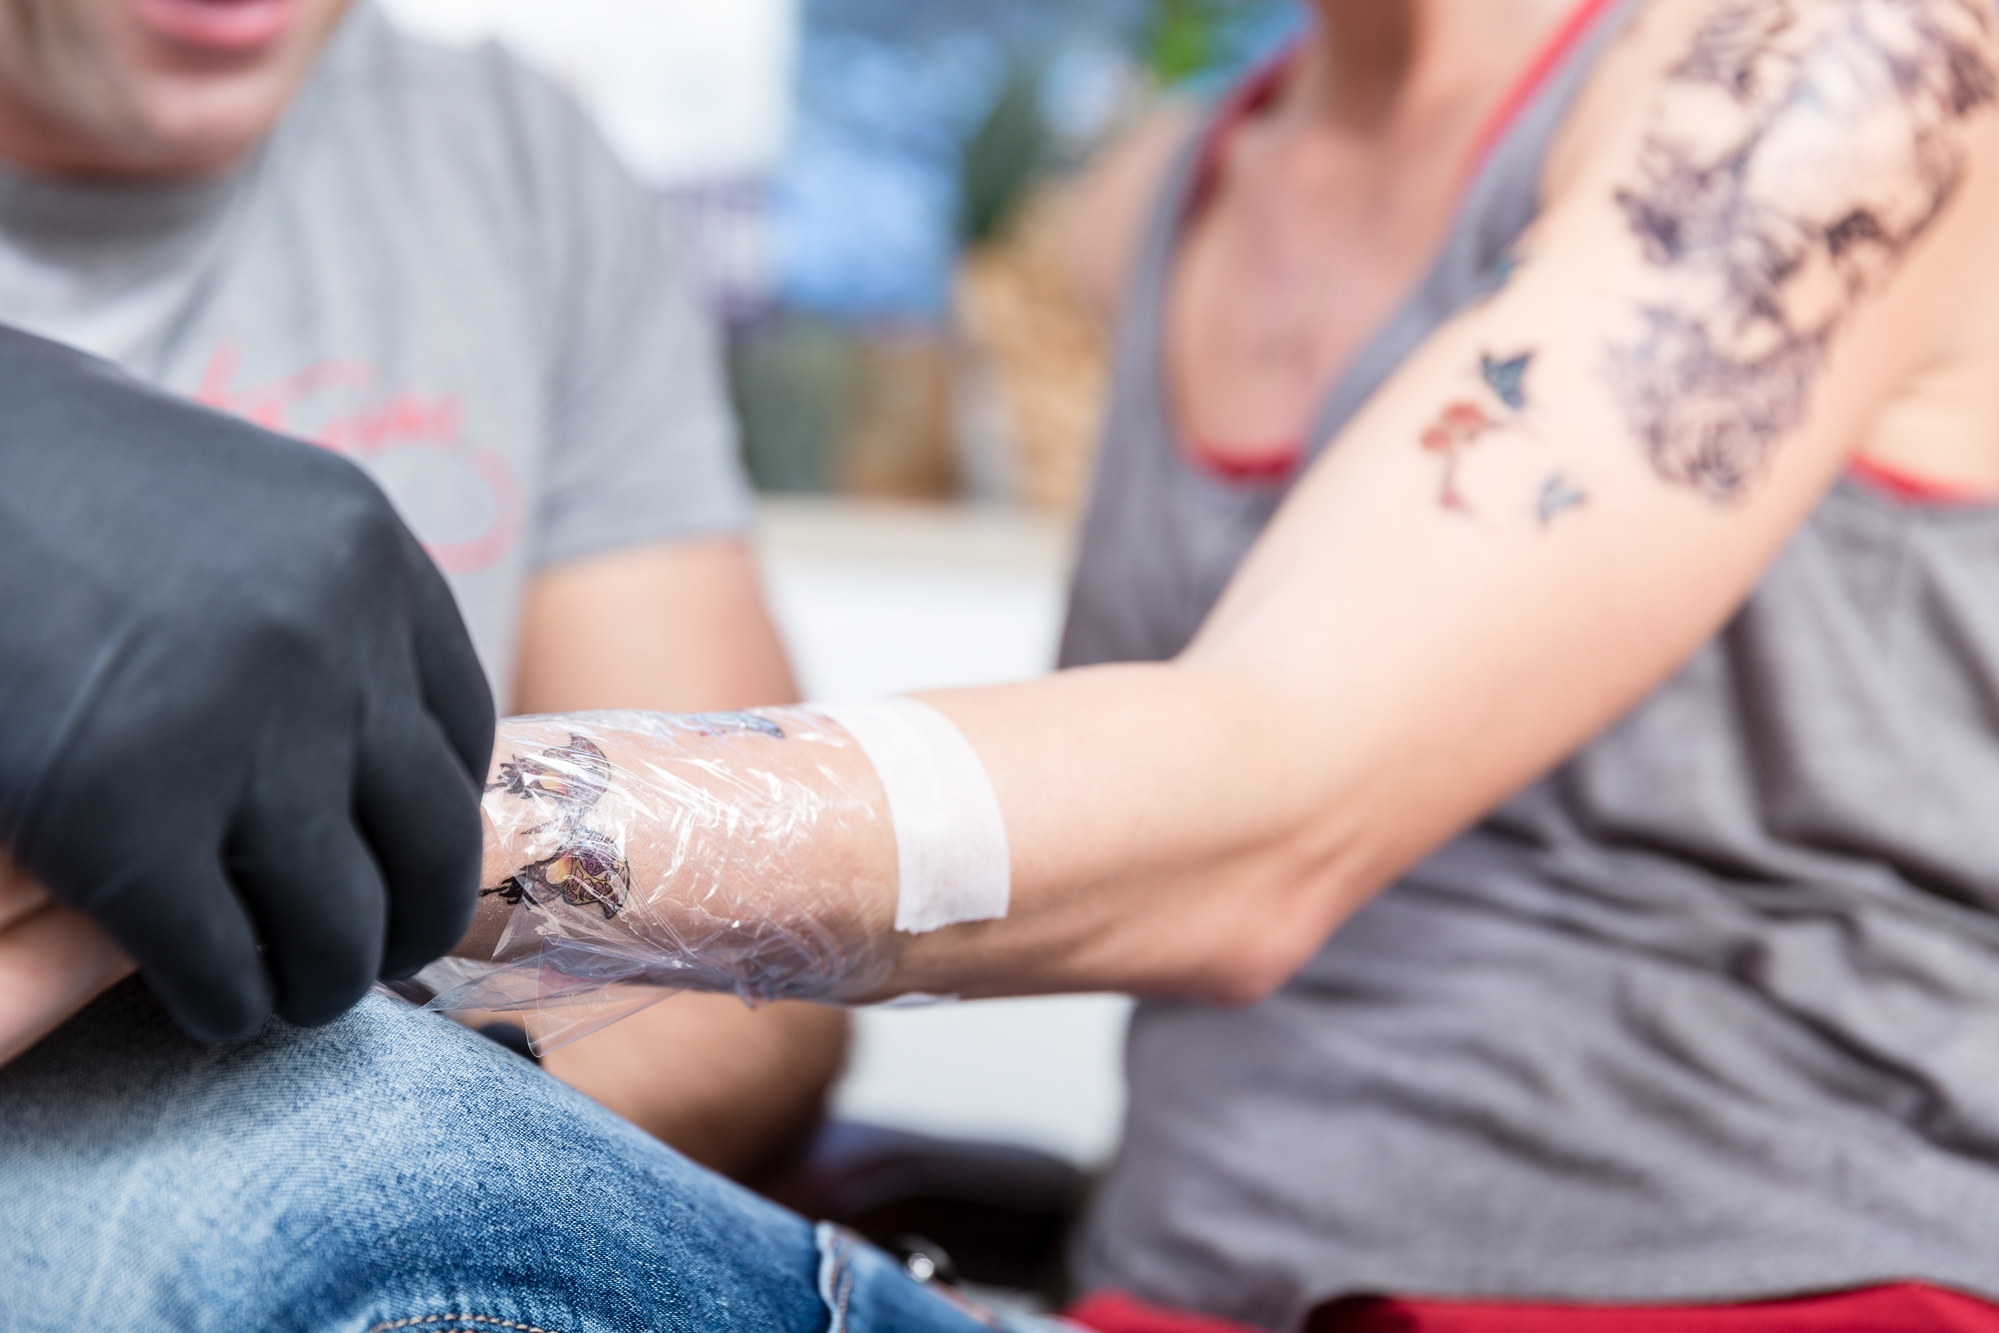 How to Prevent a Tattoo from Fading